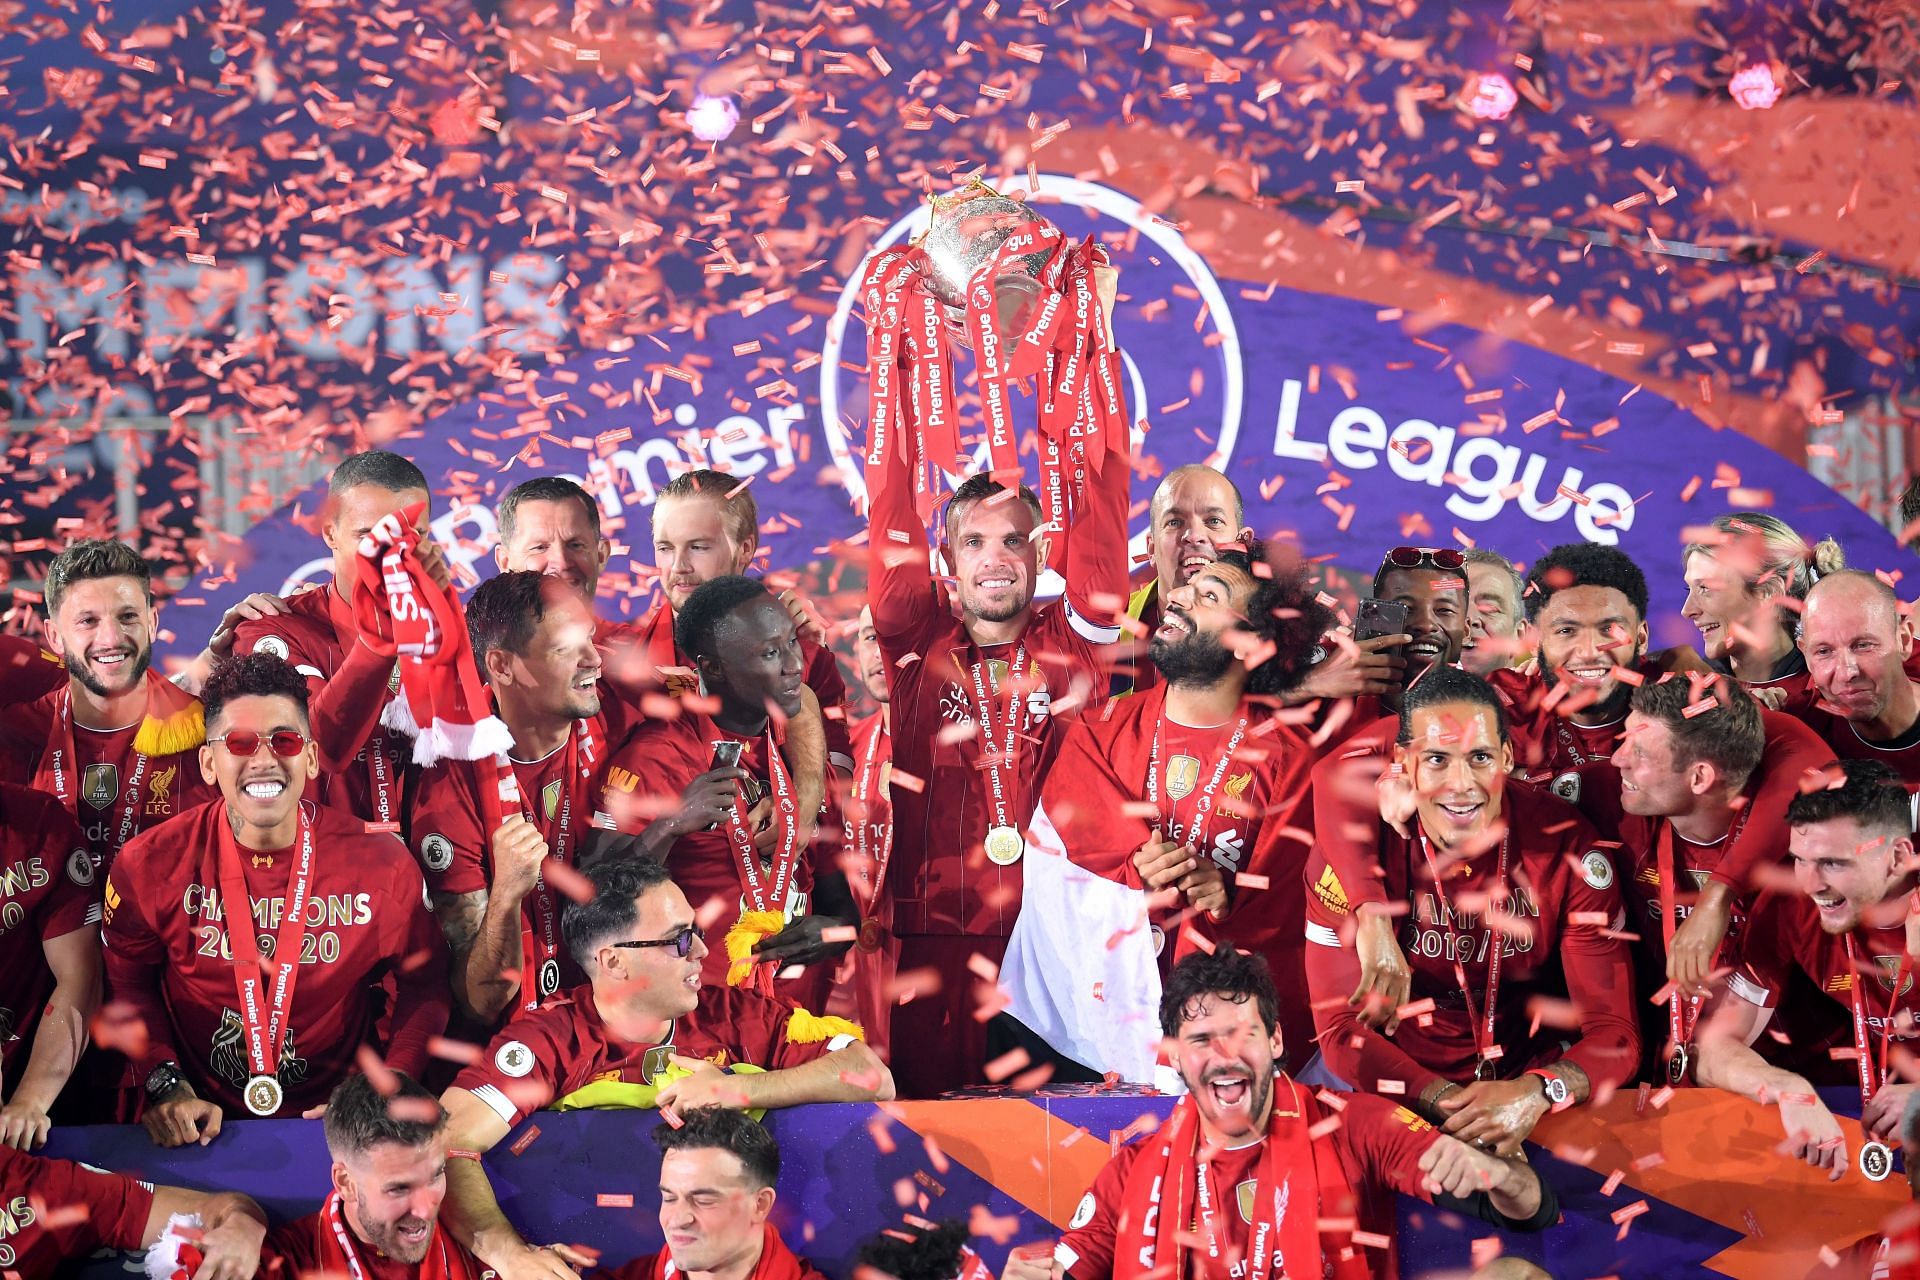 Liverpool finally won the Premier League after many disappointments in the past